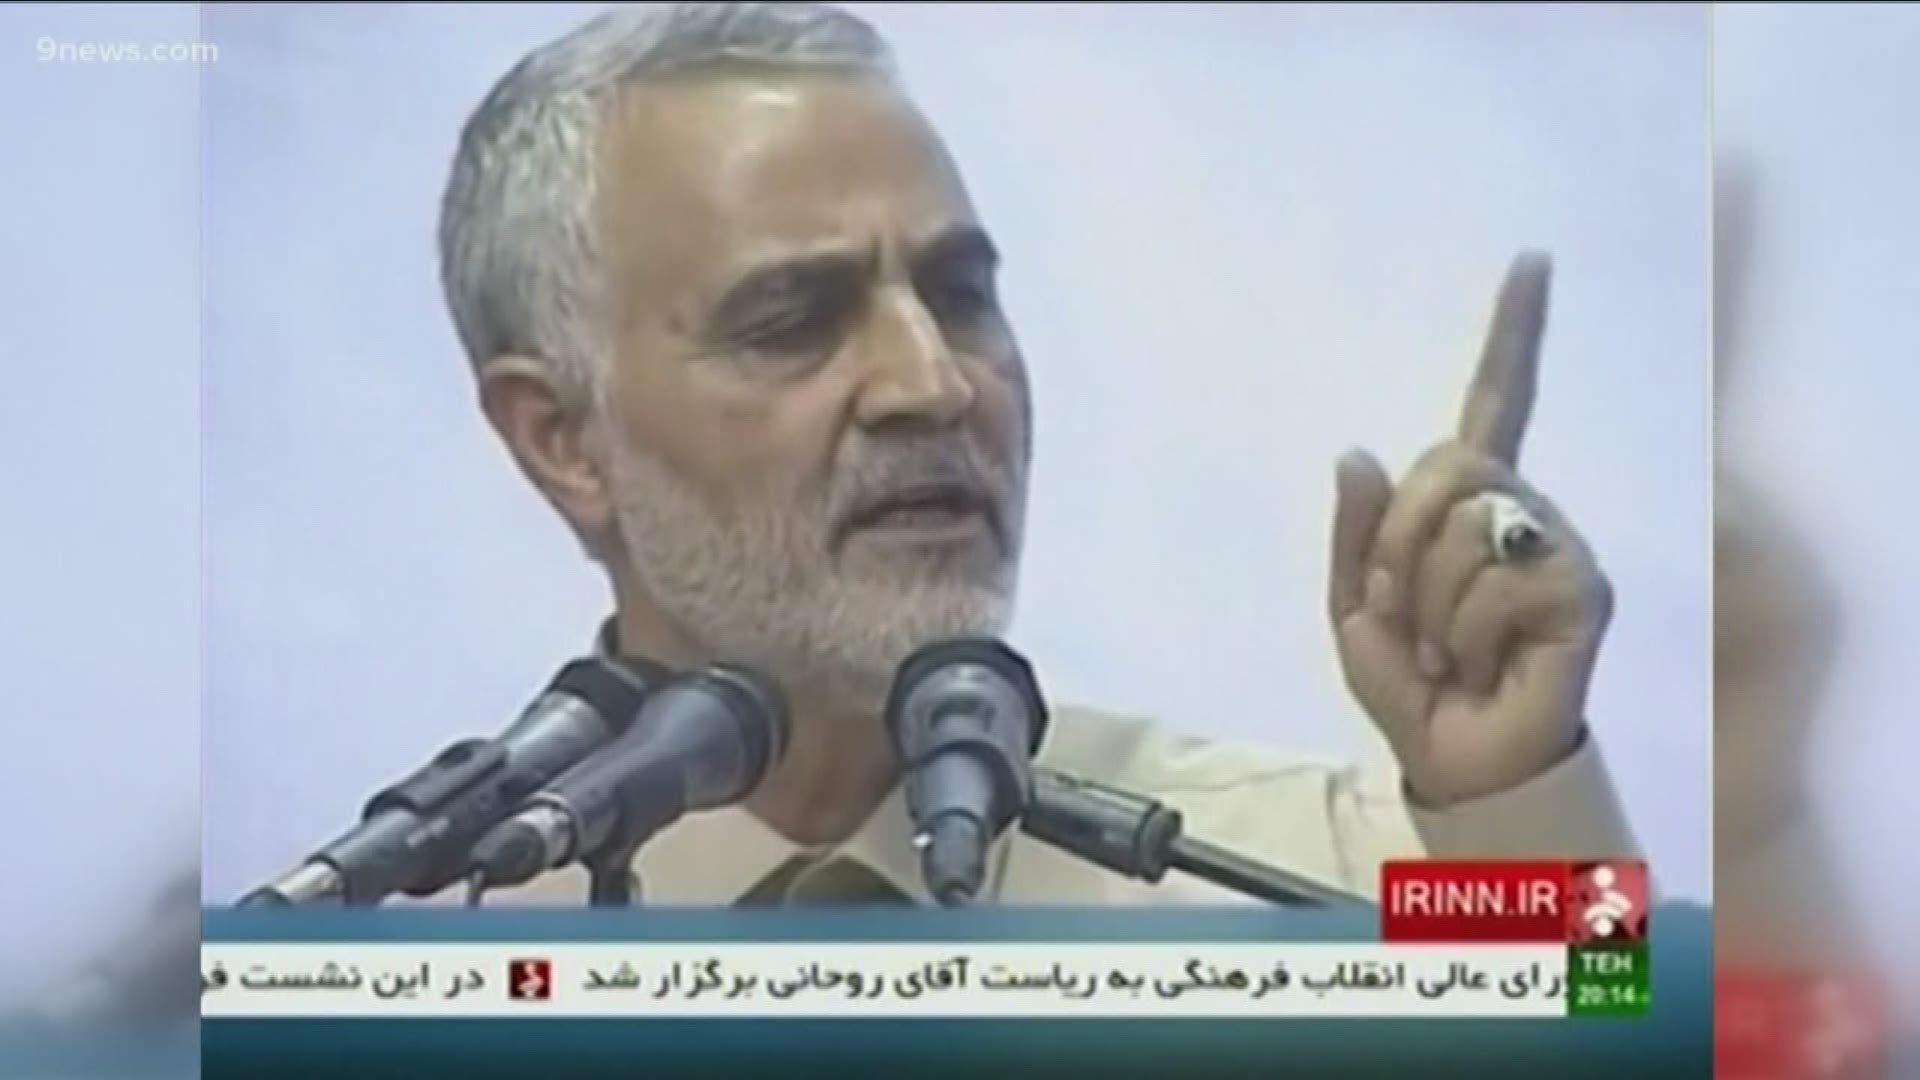 Gen. Soleimani, the head of Iran's elite Quds force, was killed in the airstrike at Baghdad airport.